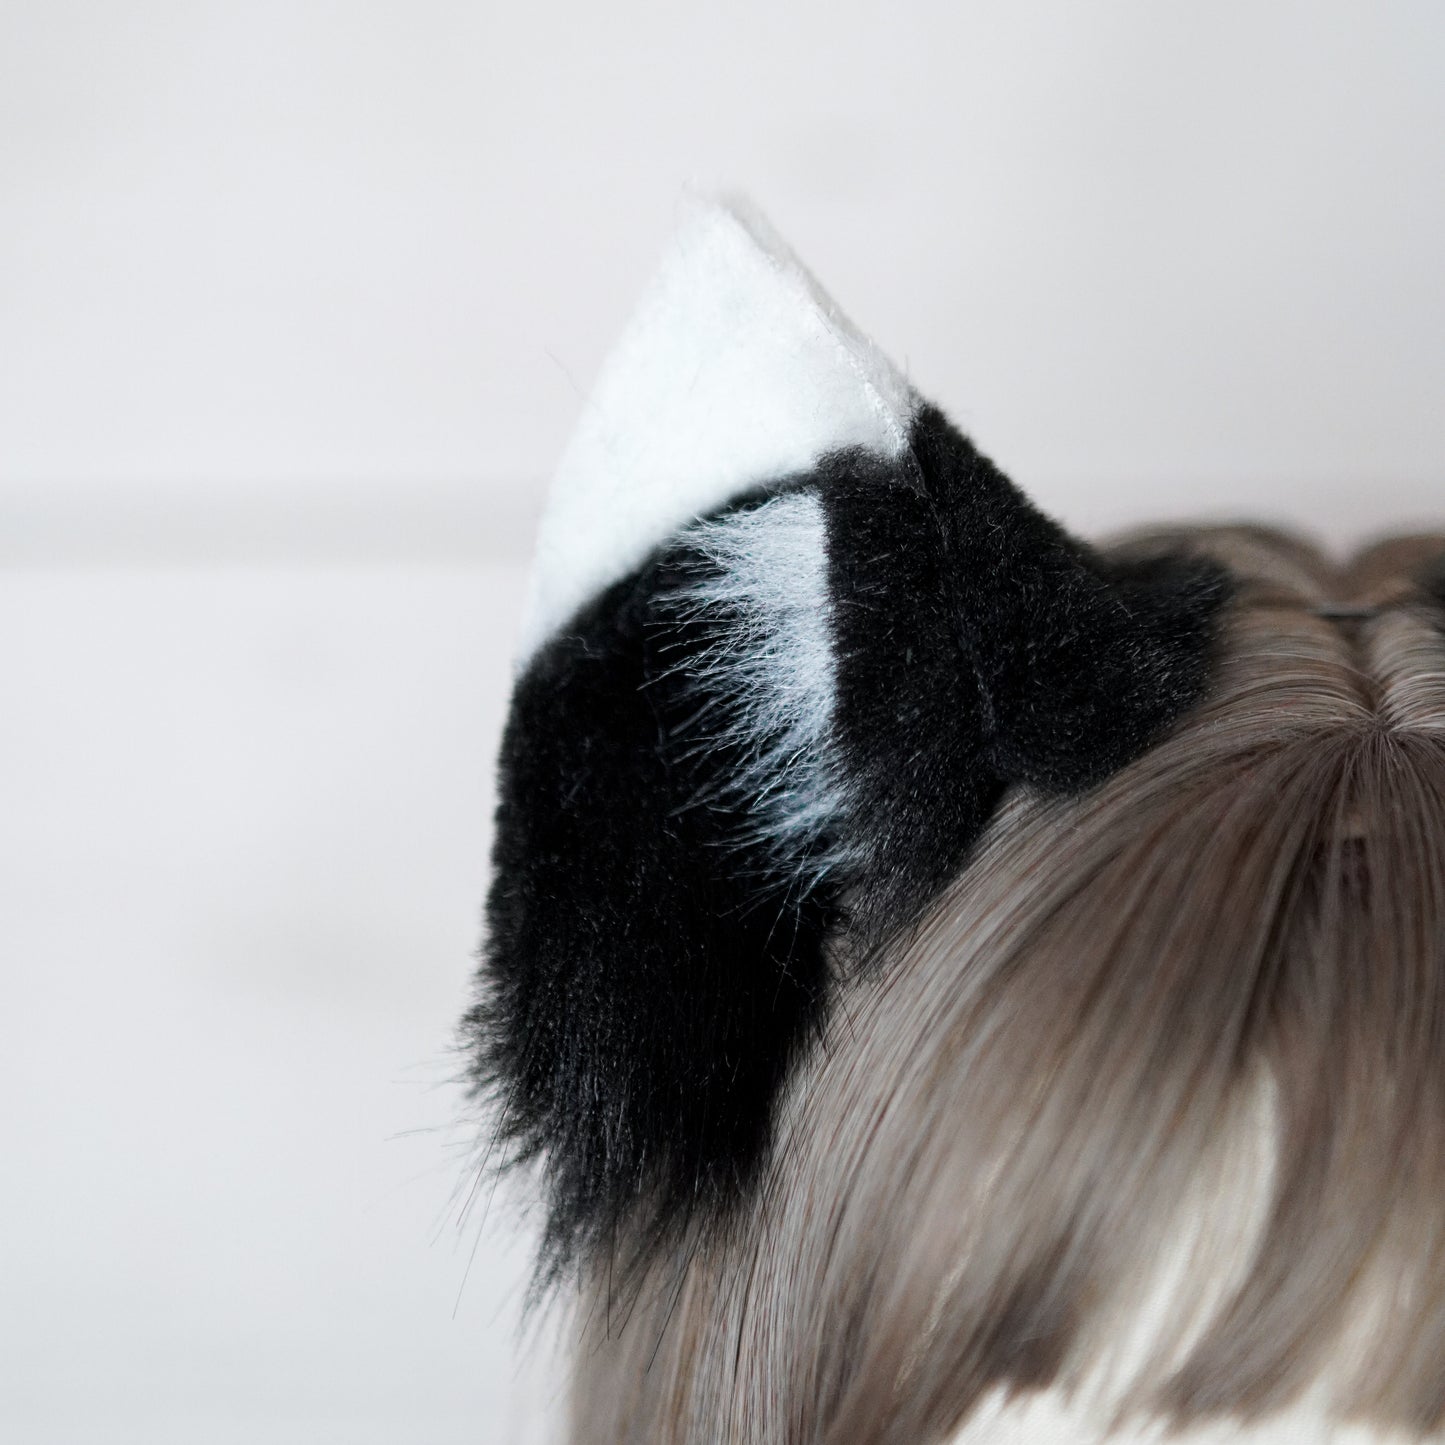 Izutsumi delicious in dungeon Cosplay Ears in black white